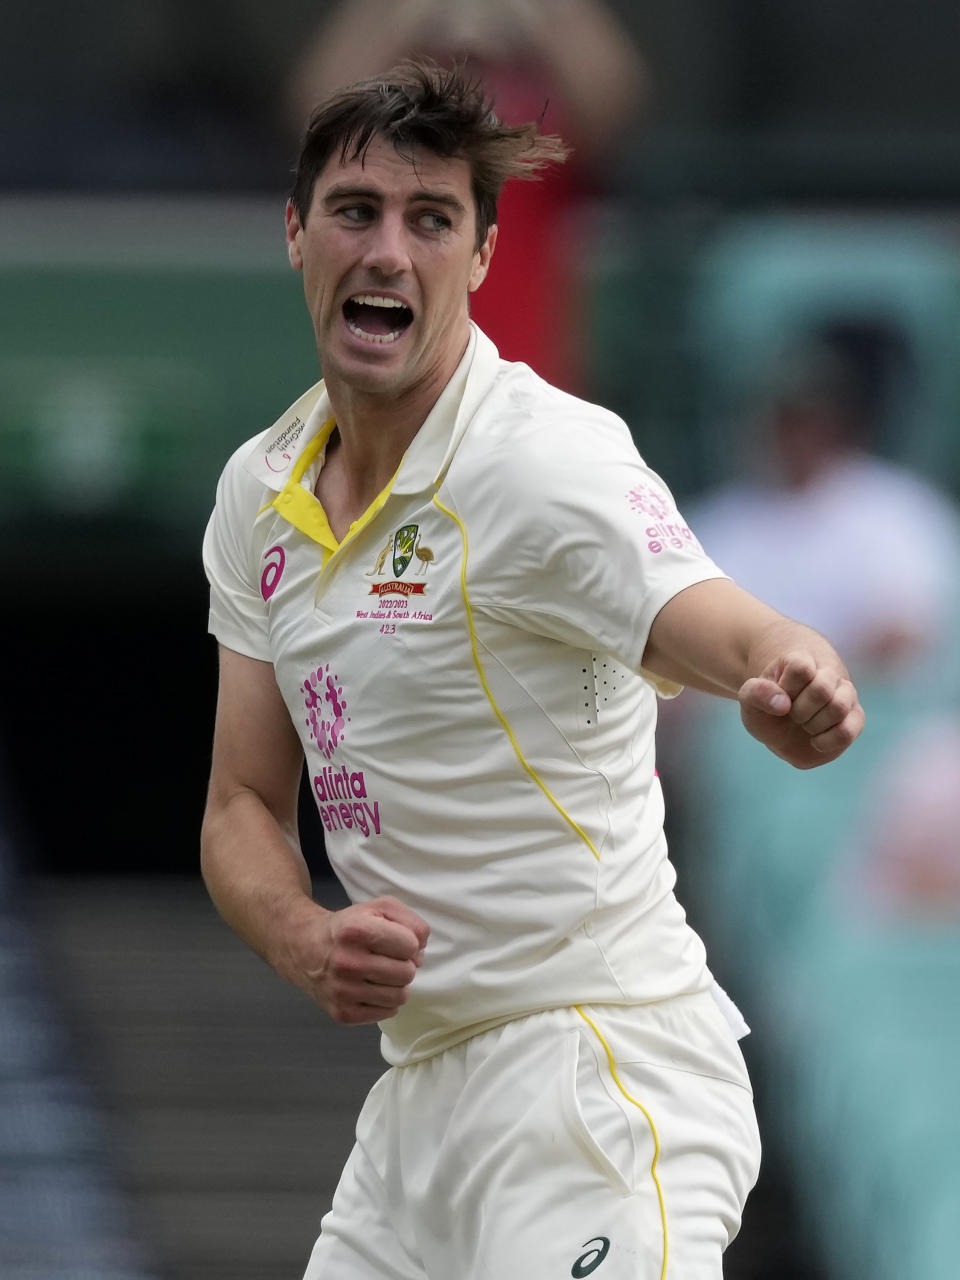 Australia's Pat Cummins celebrates taking the wicket of South Africa's Heinrich Klaasen during the fourth day of their cricket test match at the Sydney Cricket Ground in Sydney, Saturday, Jan. 7, 2023. (AP Photo/Rick Rycroft)